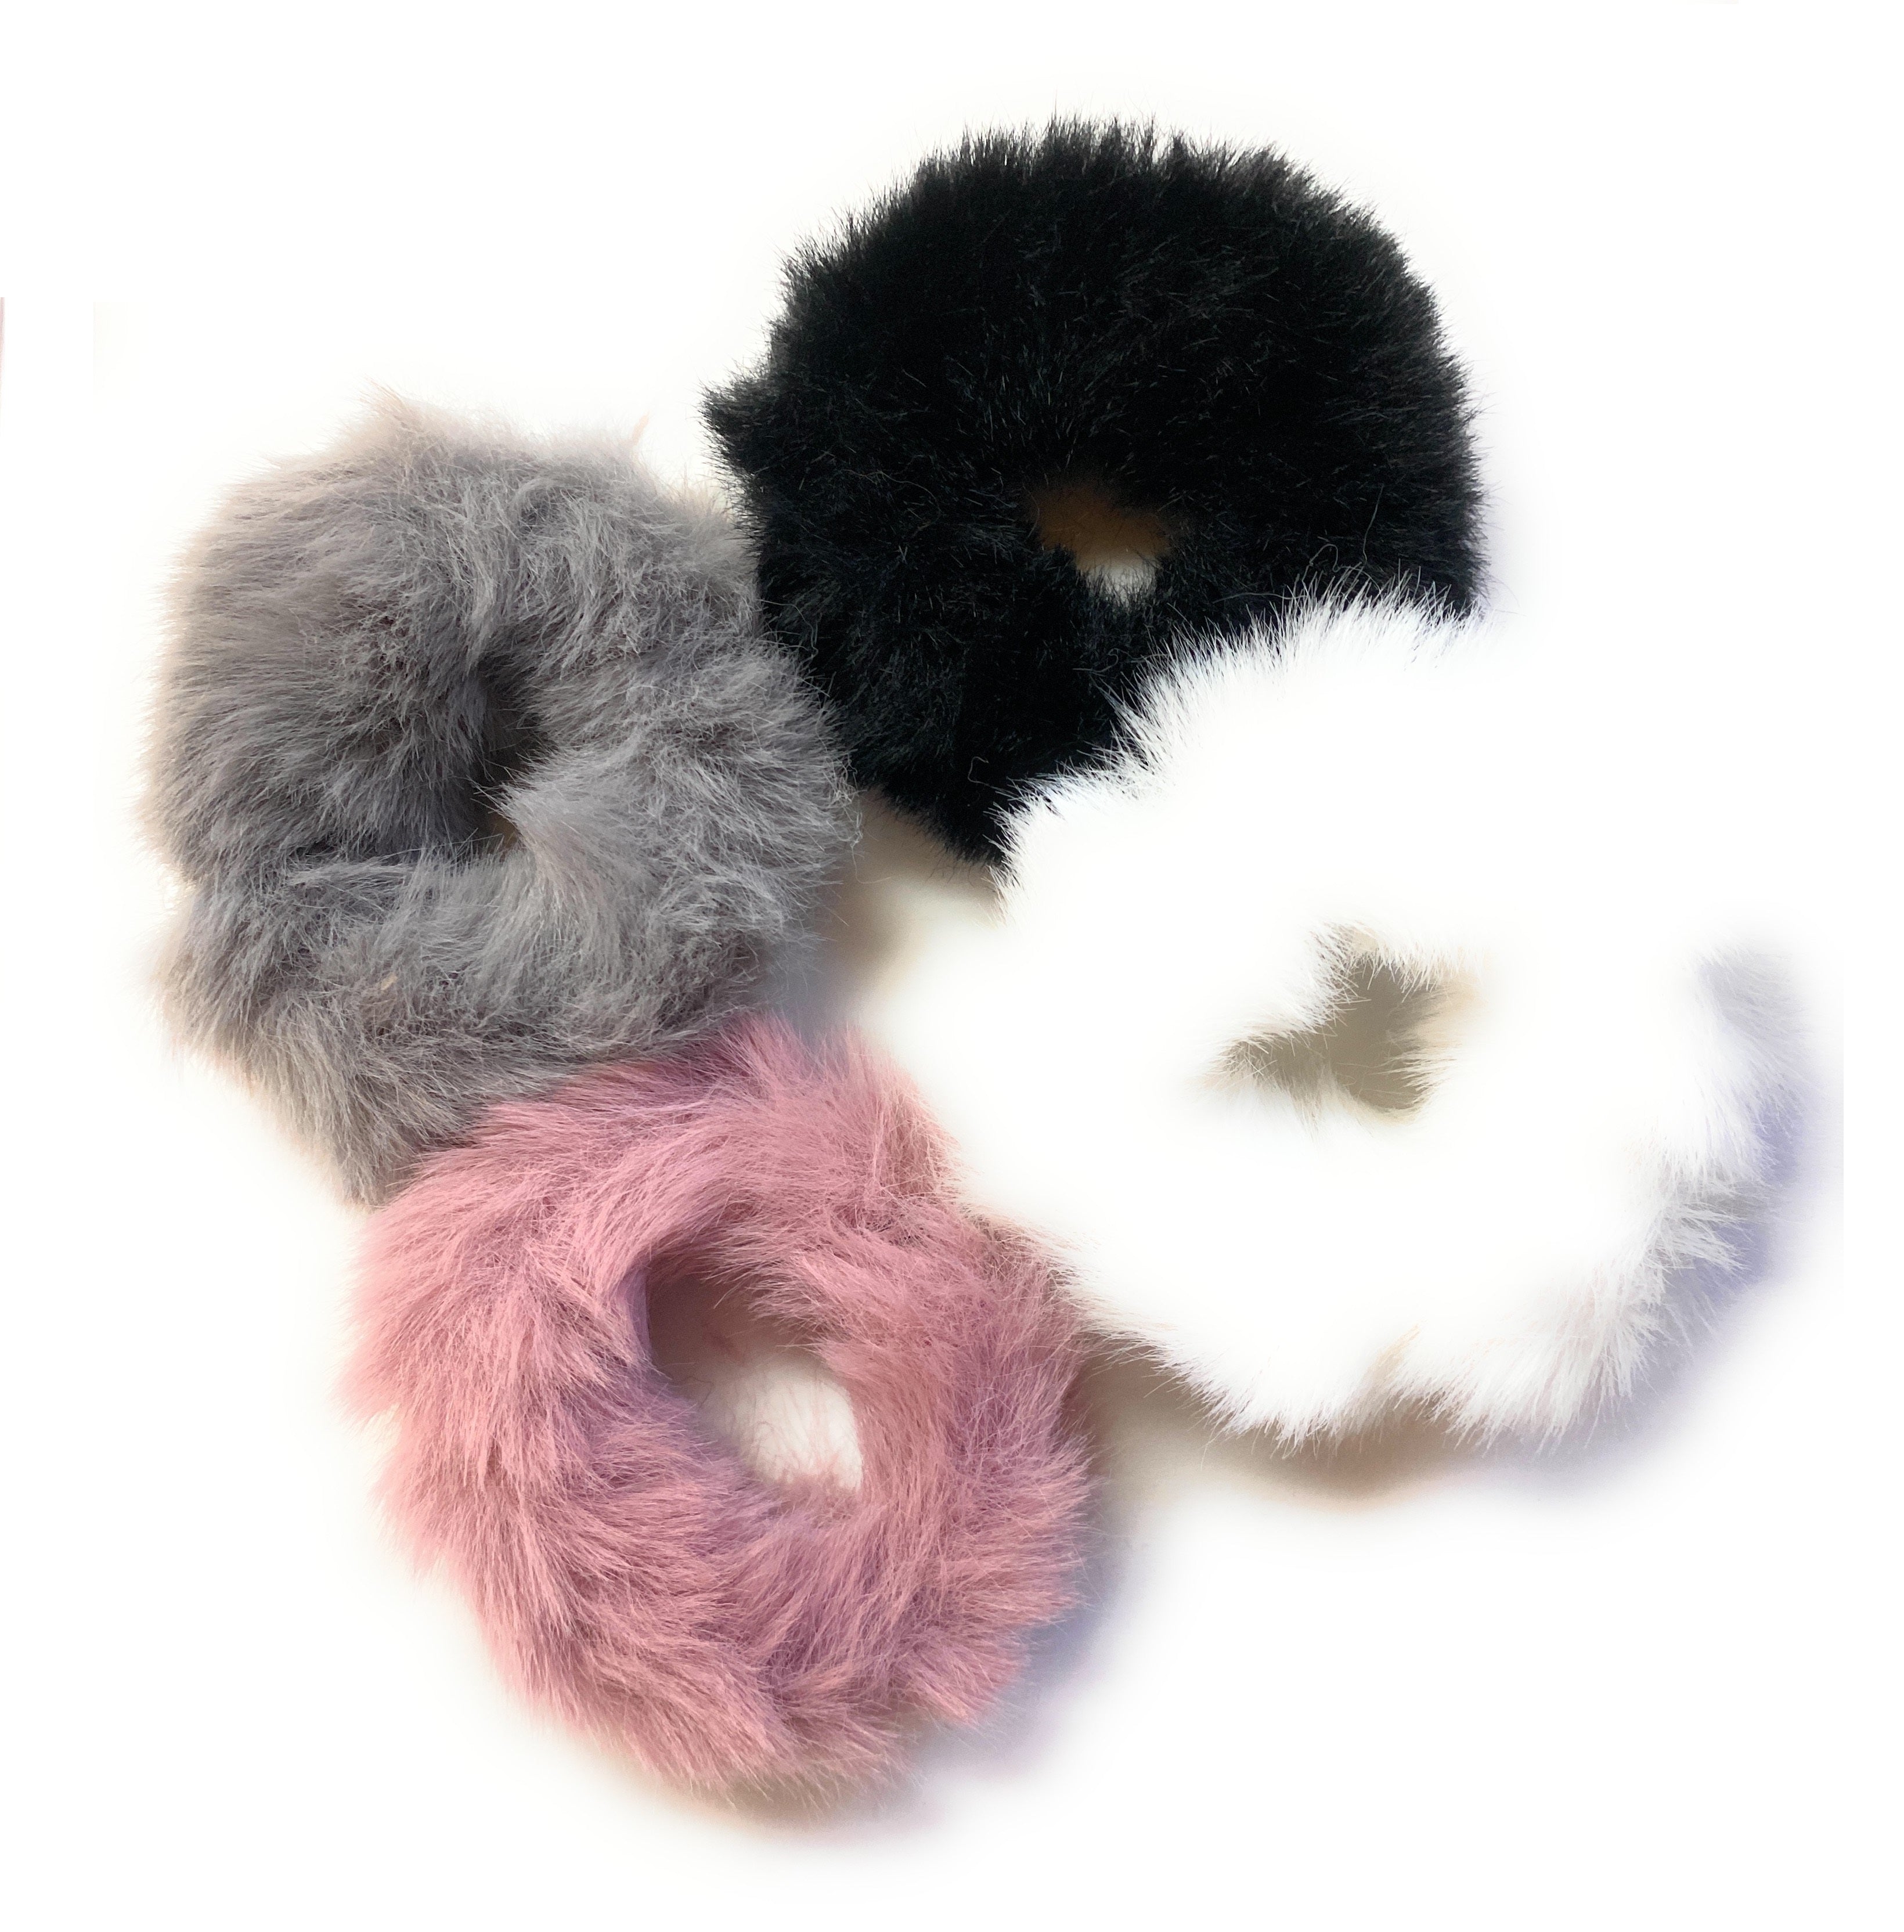 Mia Beauty Mini Furry Scrunchies in gray, black, pink and white colors